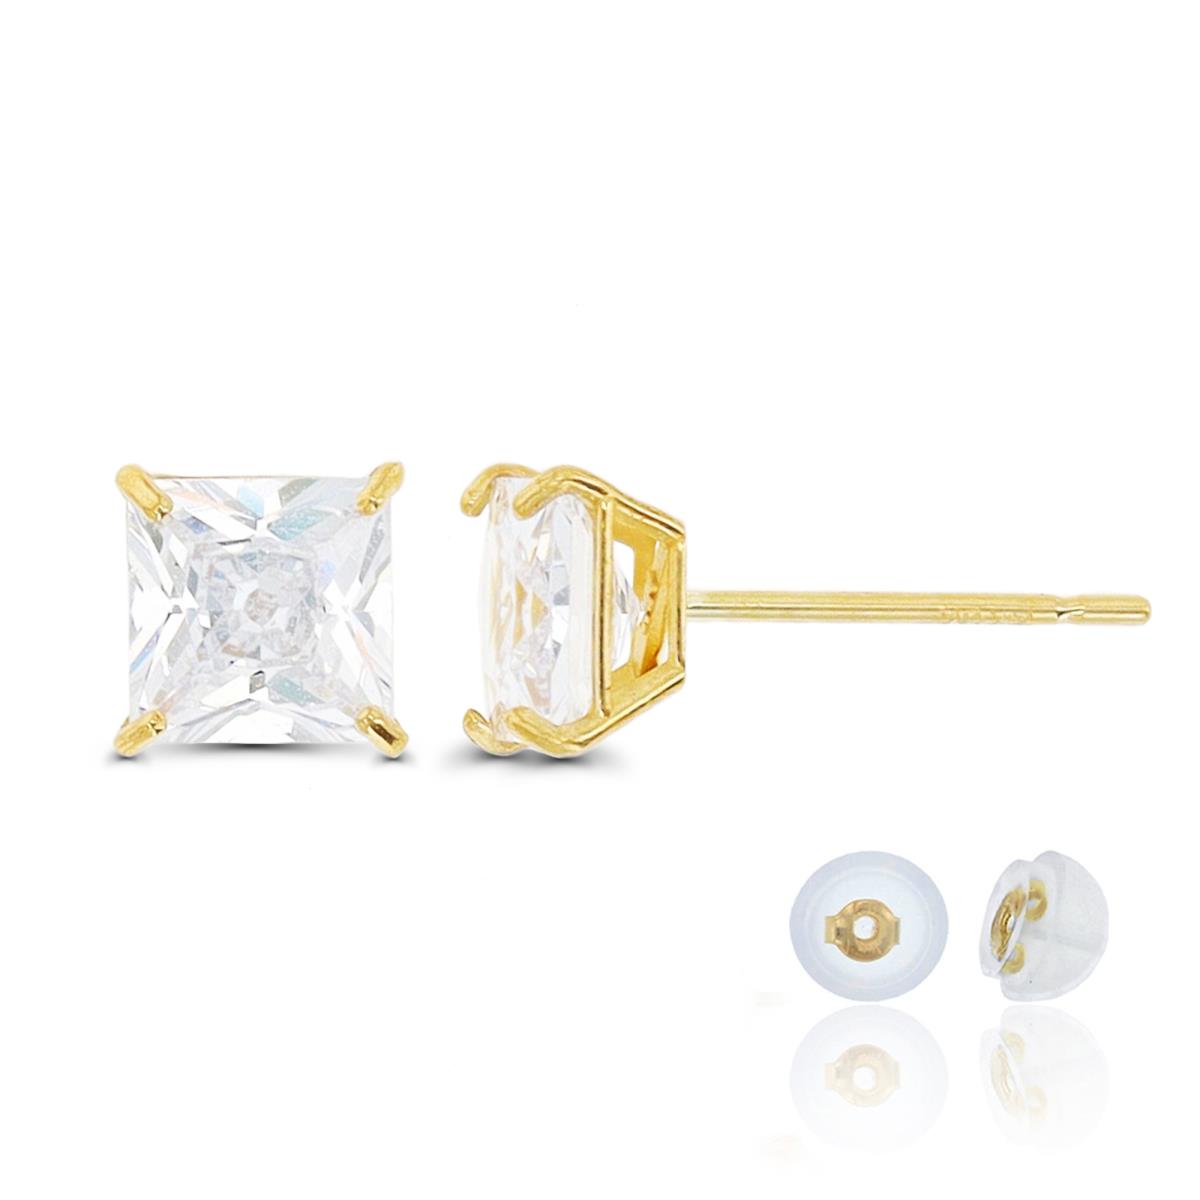 14K Yellow Gold 5mm Square White CZ Stud Earring with Silicone Back